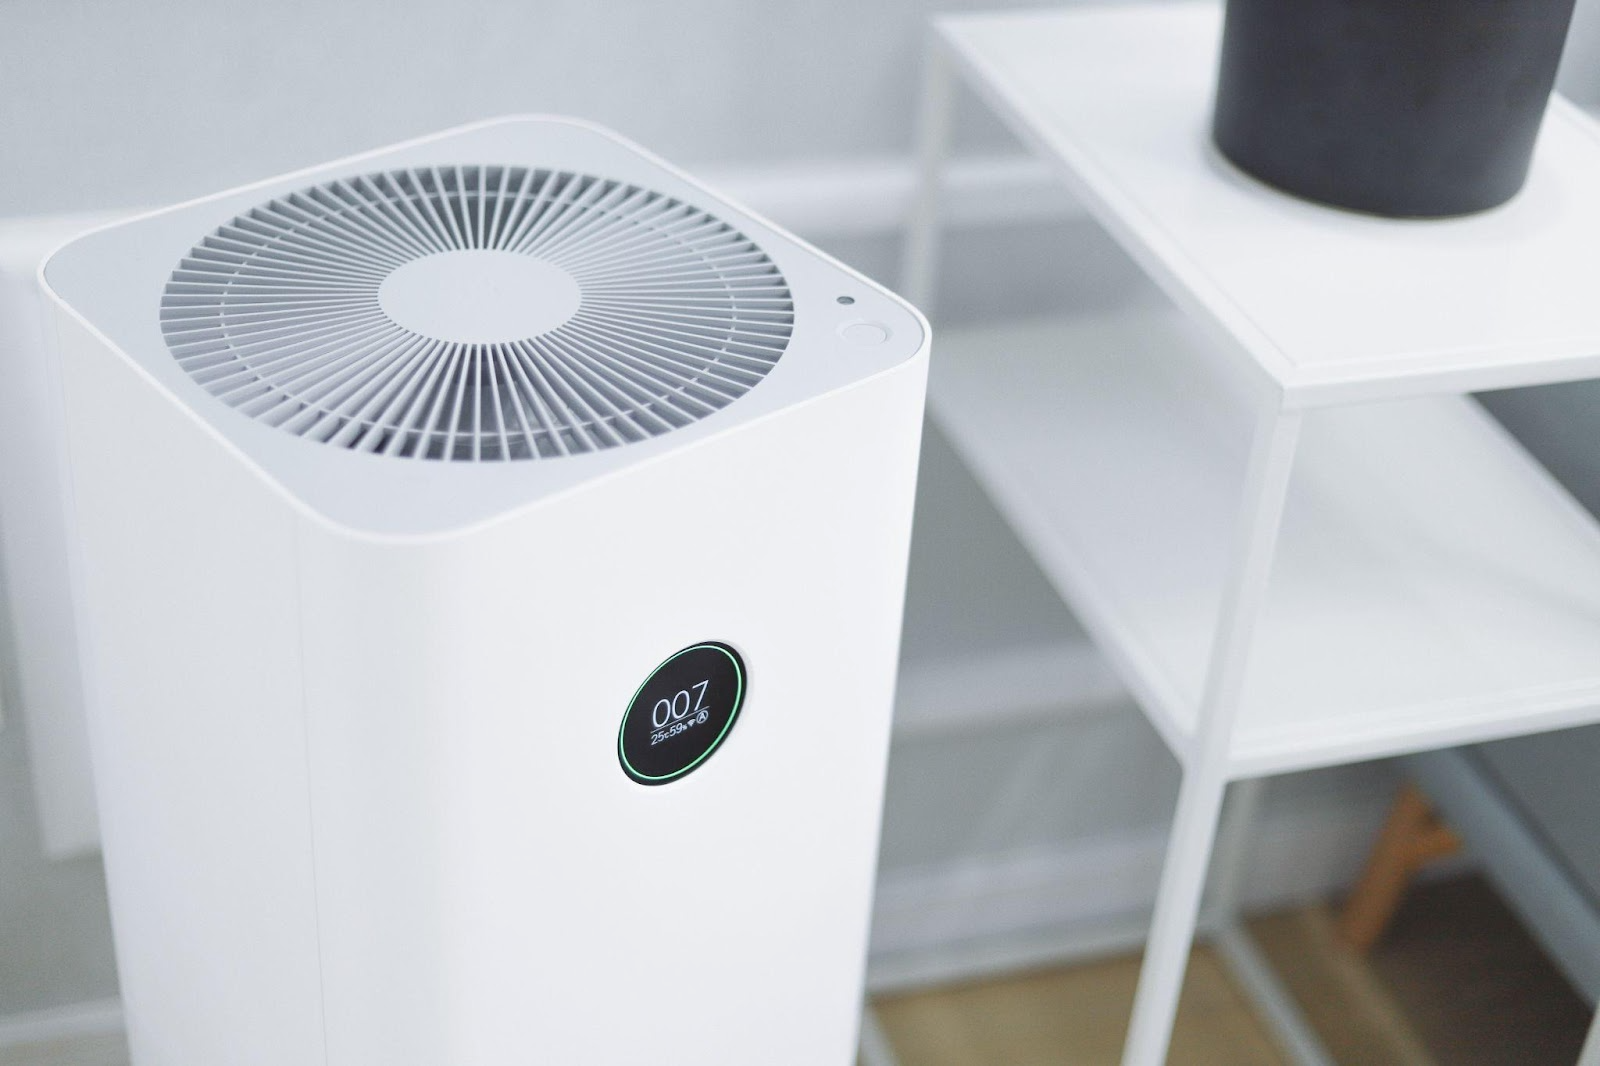 An image of a high quality room air purifier with state-of-the-art air filtration from Airpuria, relating to our air purifier guide for 2023.